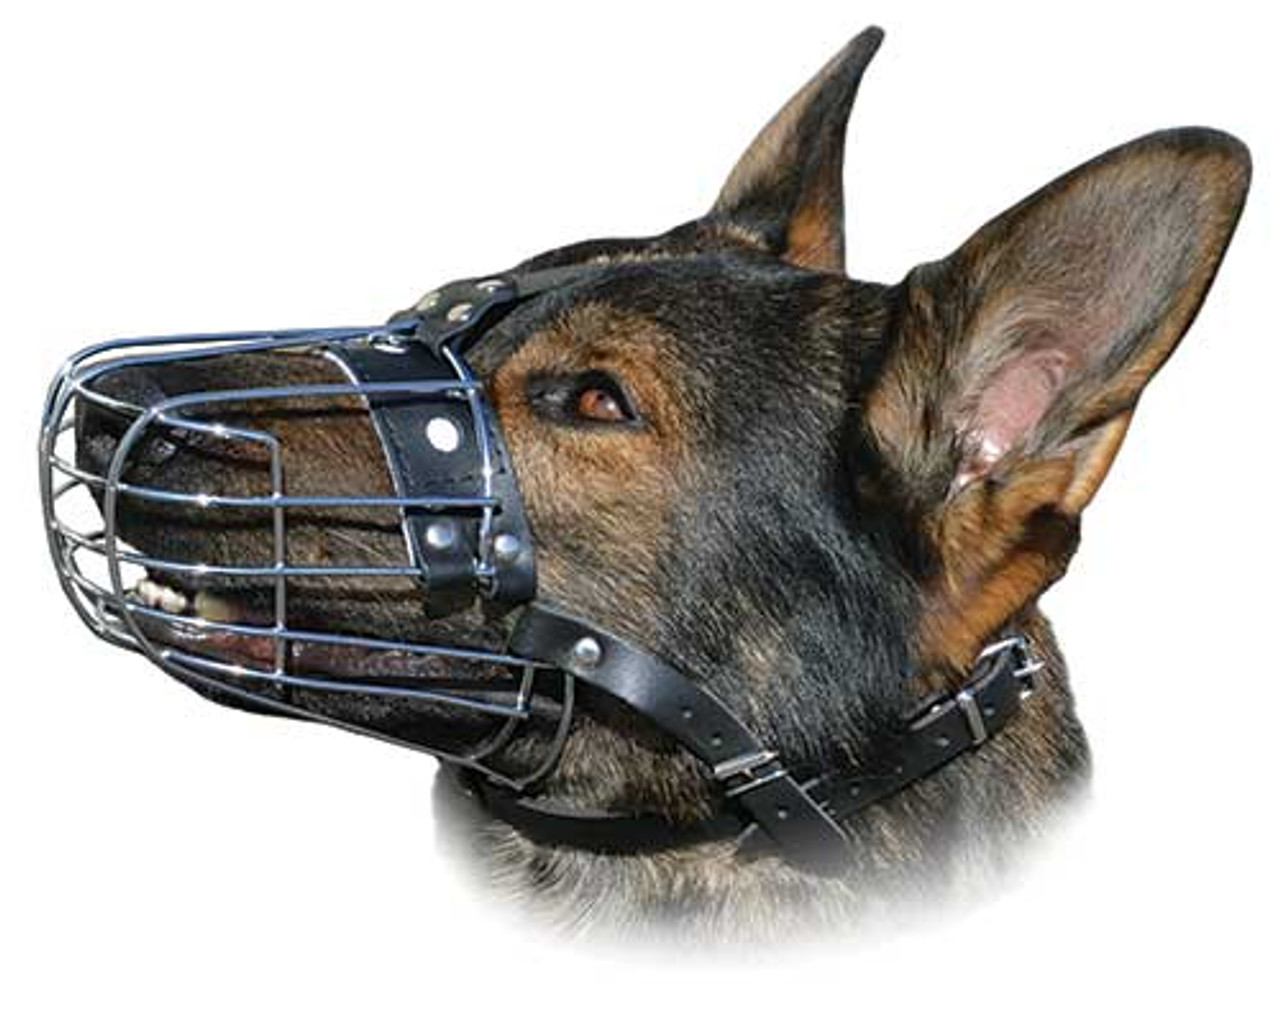 where can i get a dog muzzle